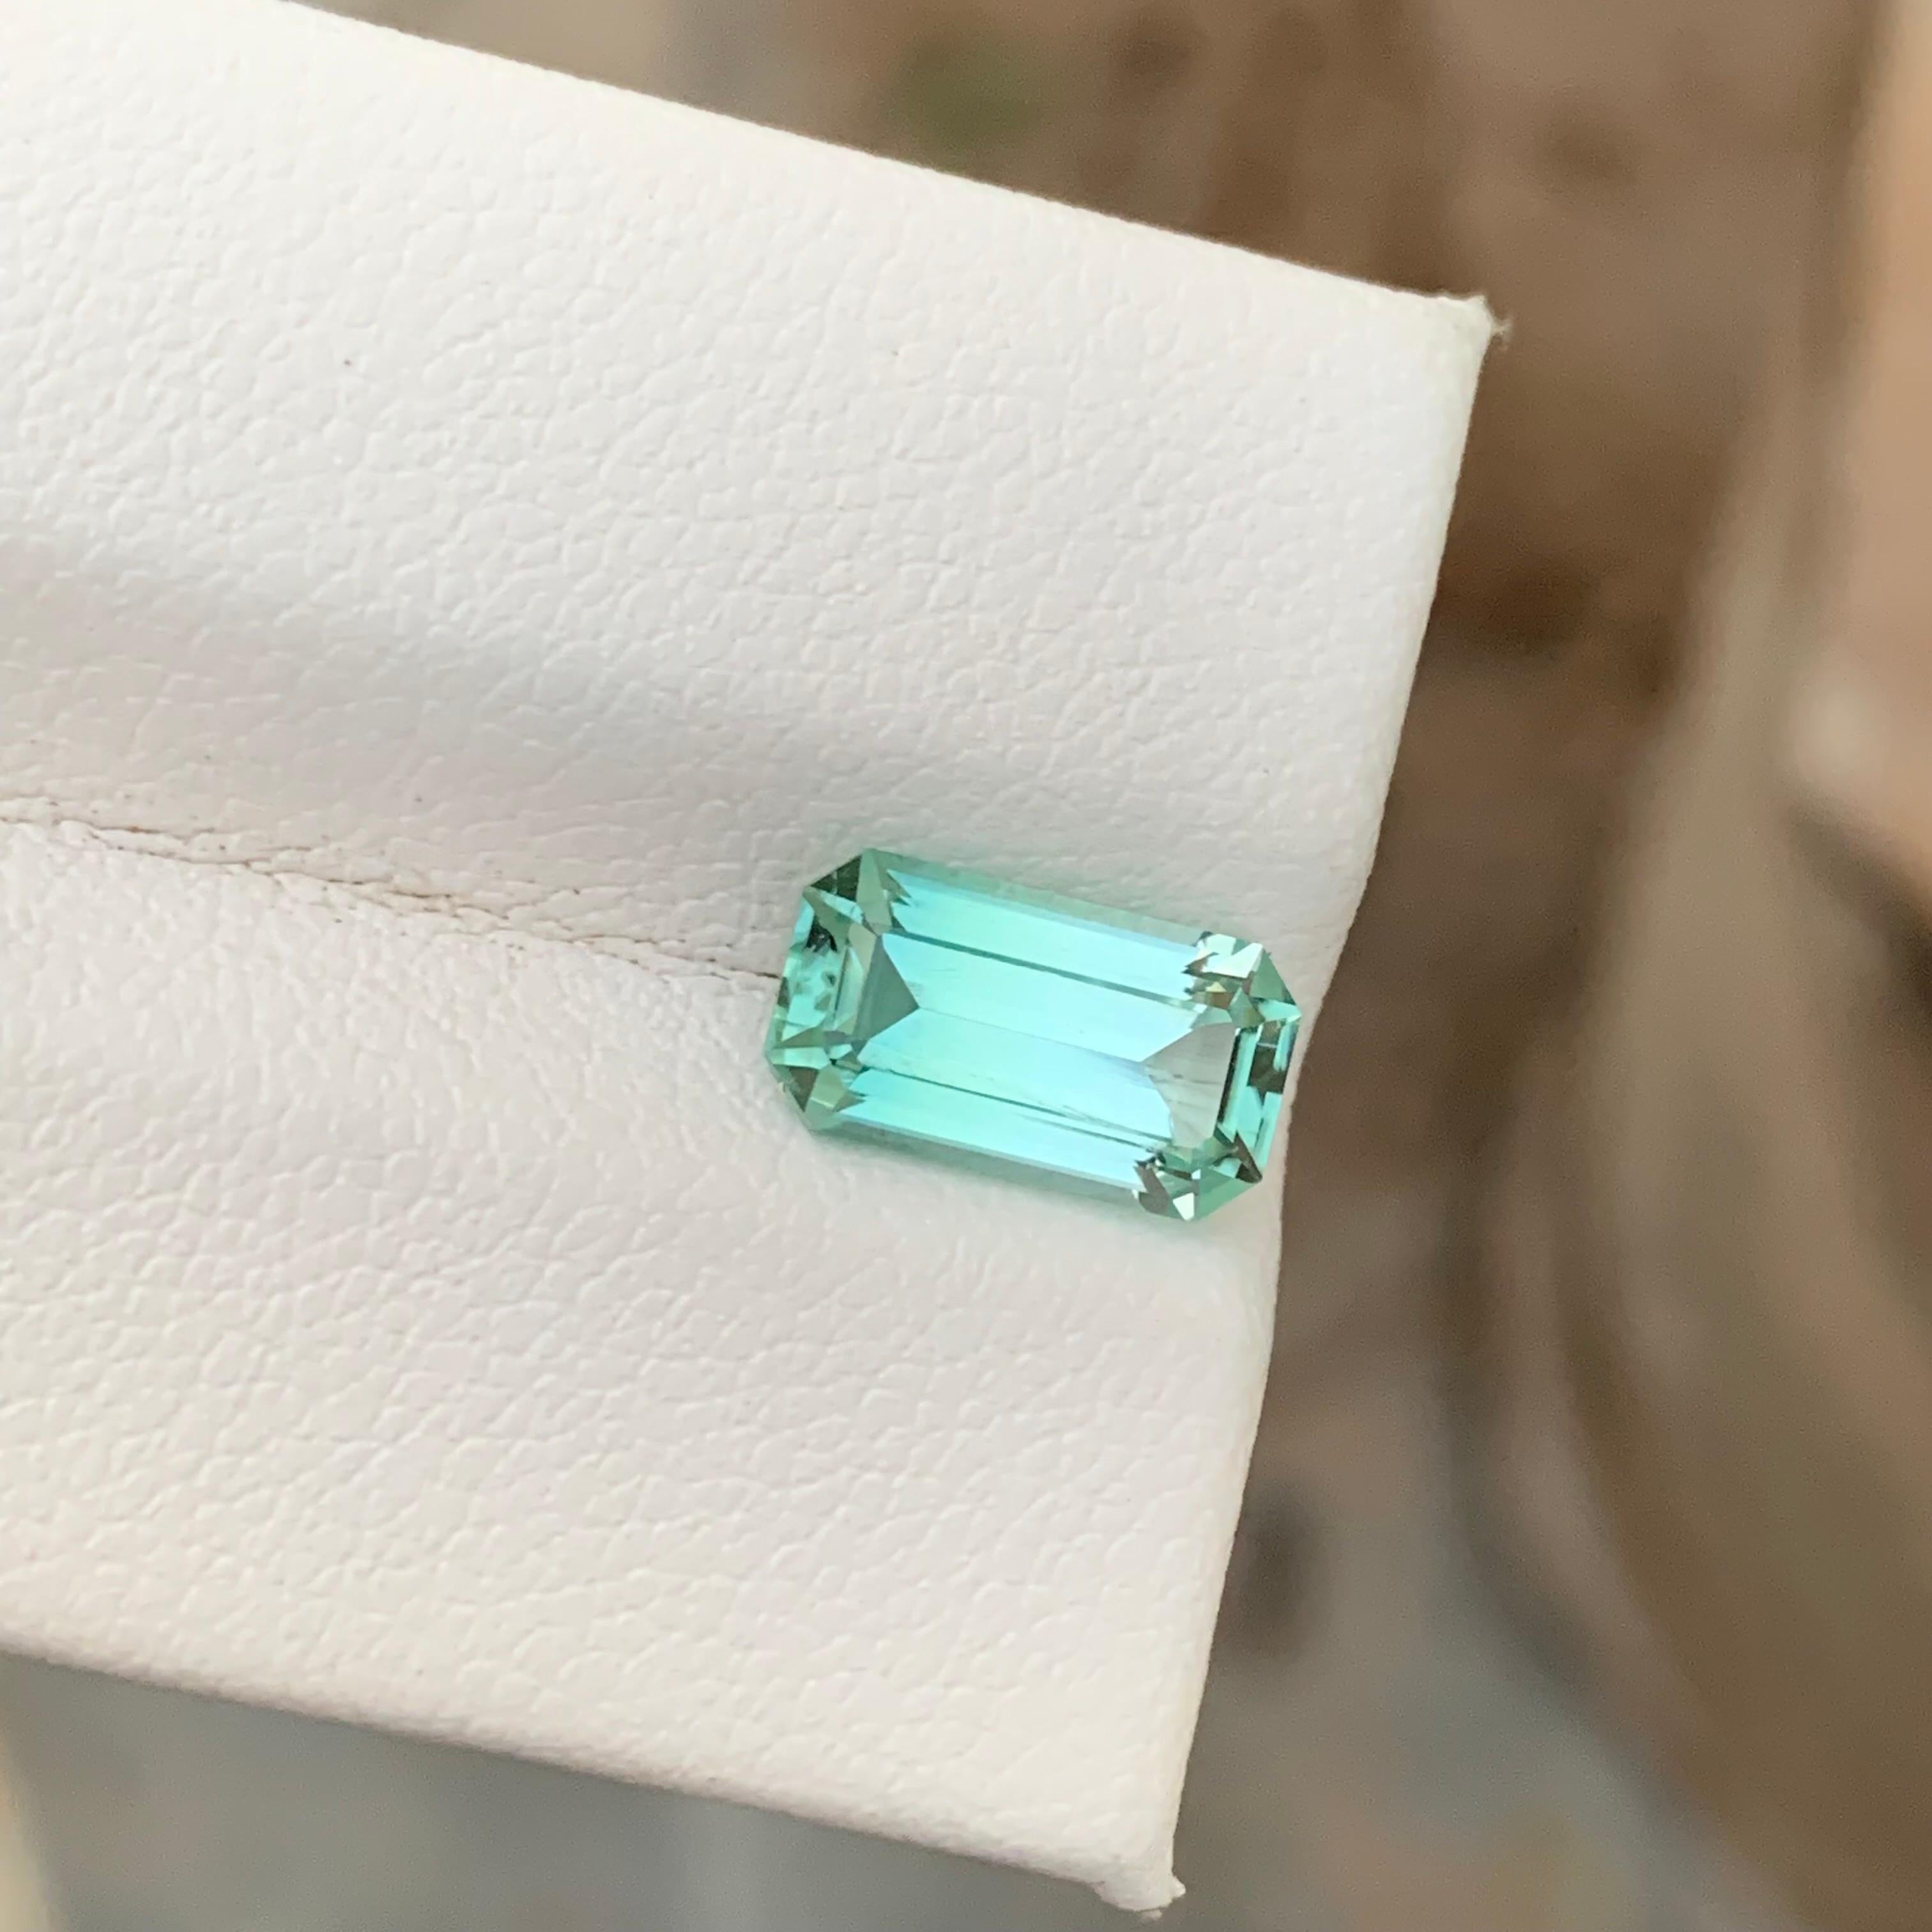 Loose Tourmaline 
Weight: 2.40 Carats 
Dimension:10.6x6x4.6 Mm
Origin: Kunar Afghanistan 
Shape: Emerald 
Color: Mint Seafoam
Clarity/Quality: Loupe Clean
Treatment: Non
Certificate: On Customer Demand
Seafoam tourmaline is a captivating and rare